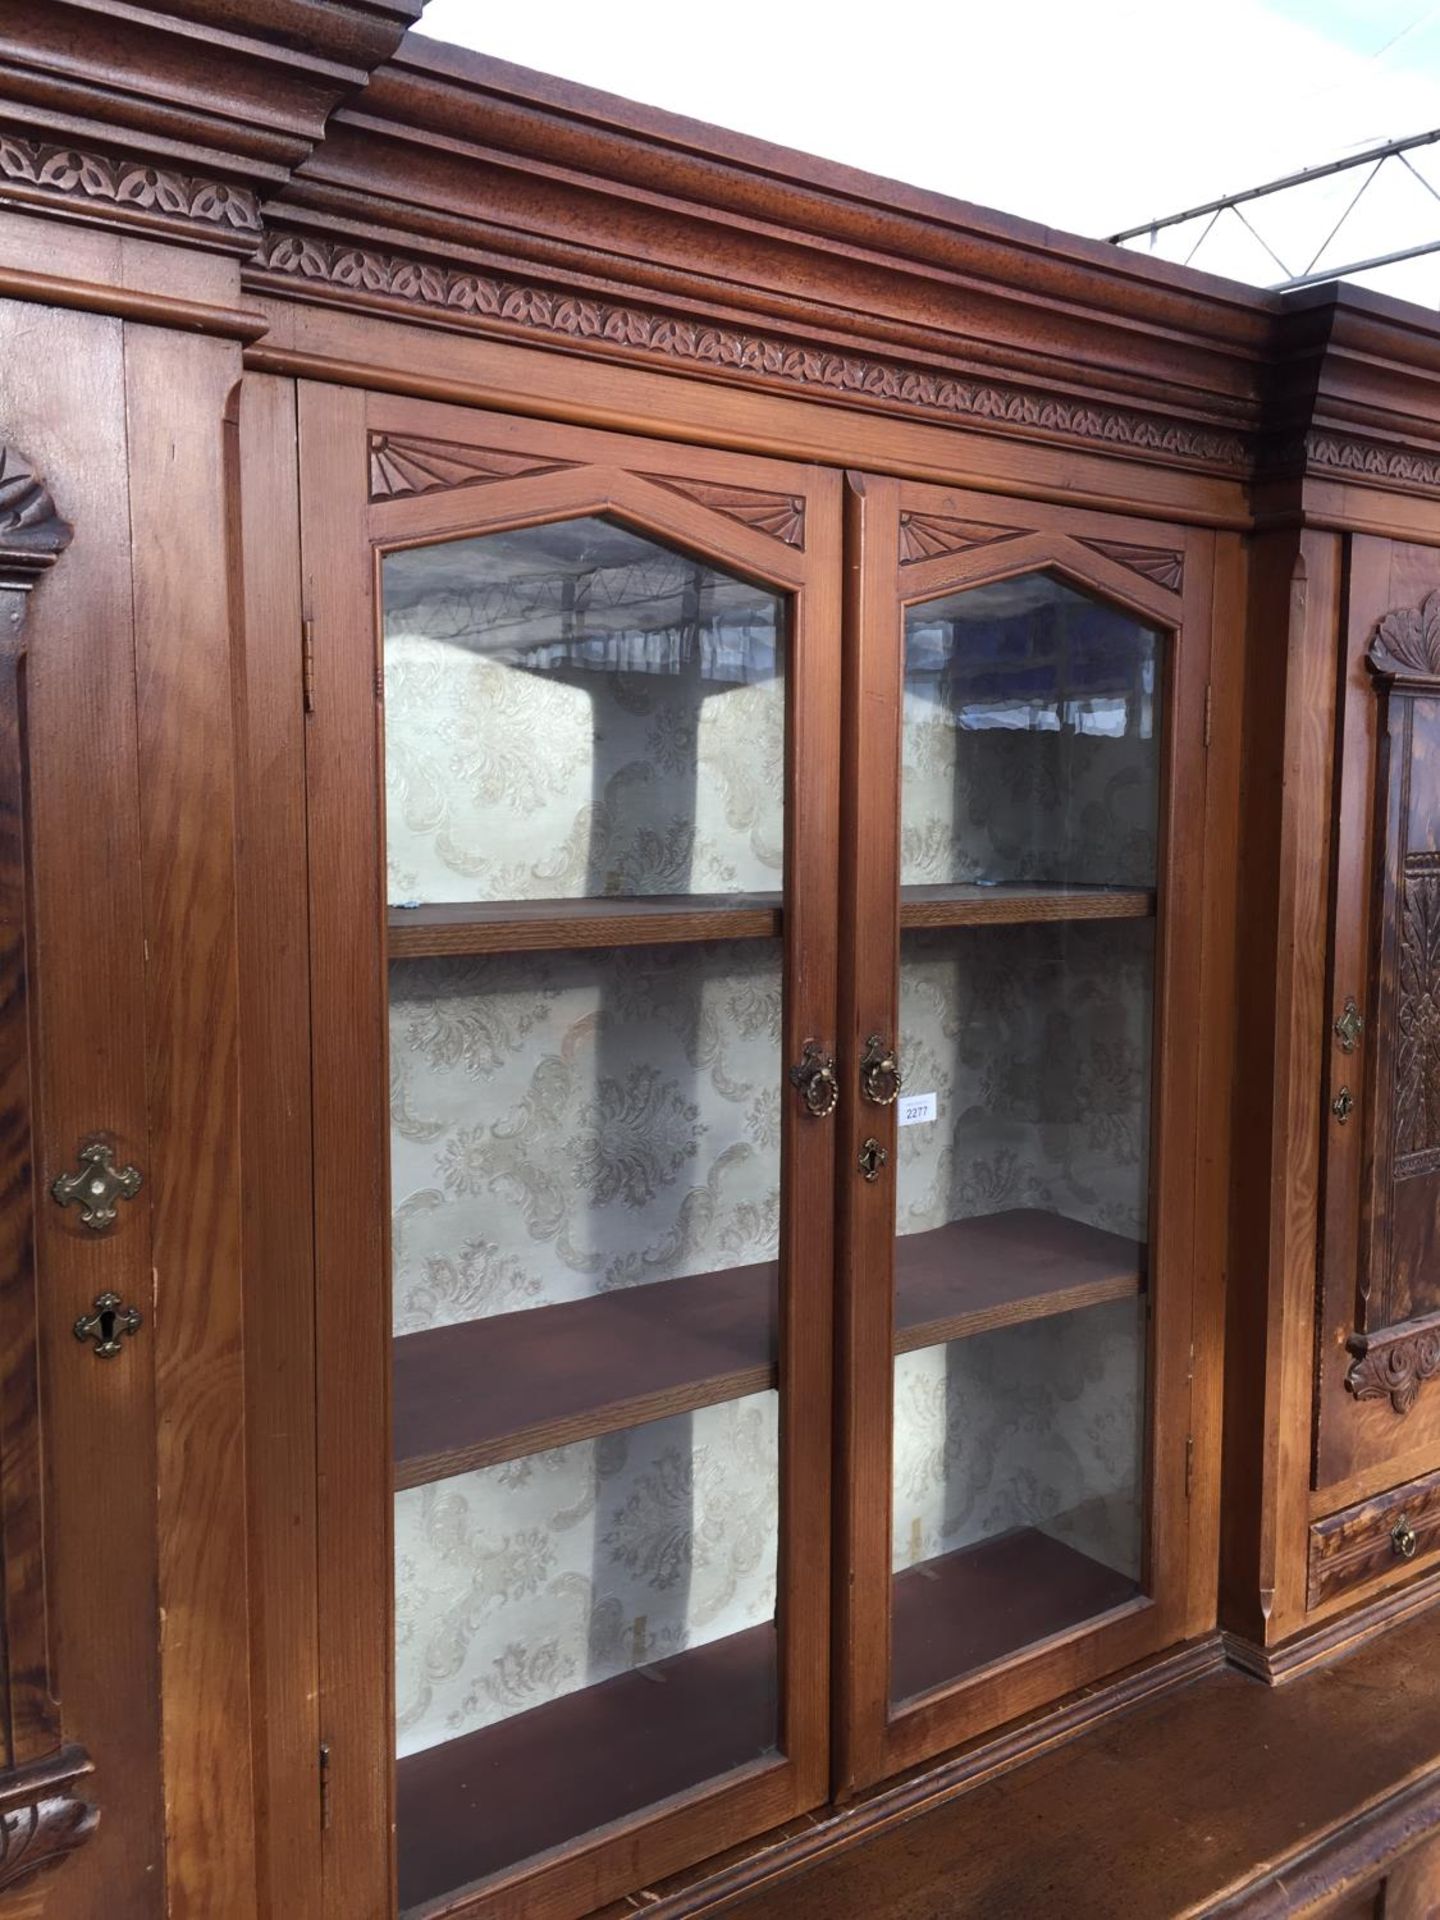 A VICTORIAN SCUMBLED PINE DRESSER, 74" WIDE, WITH INVERTED BREAKFRONT UPPER PORTION, HAVING PANELLED - Image 5 of 10